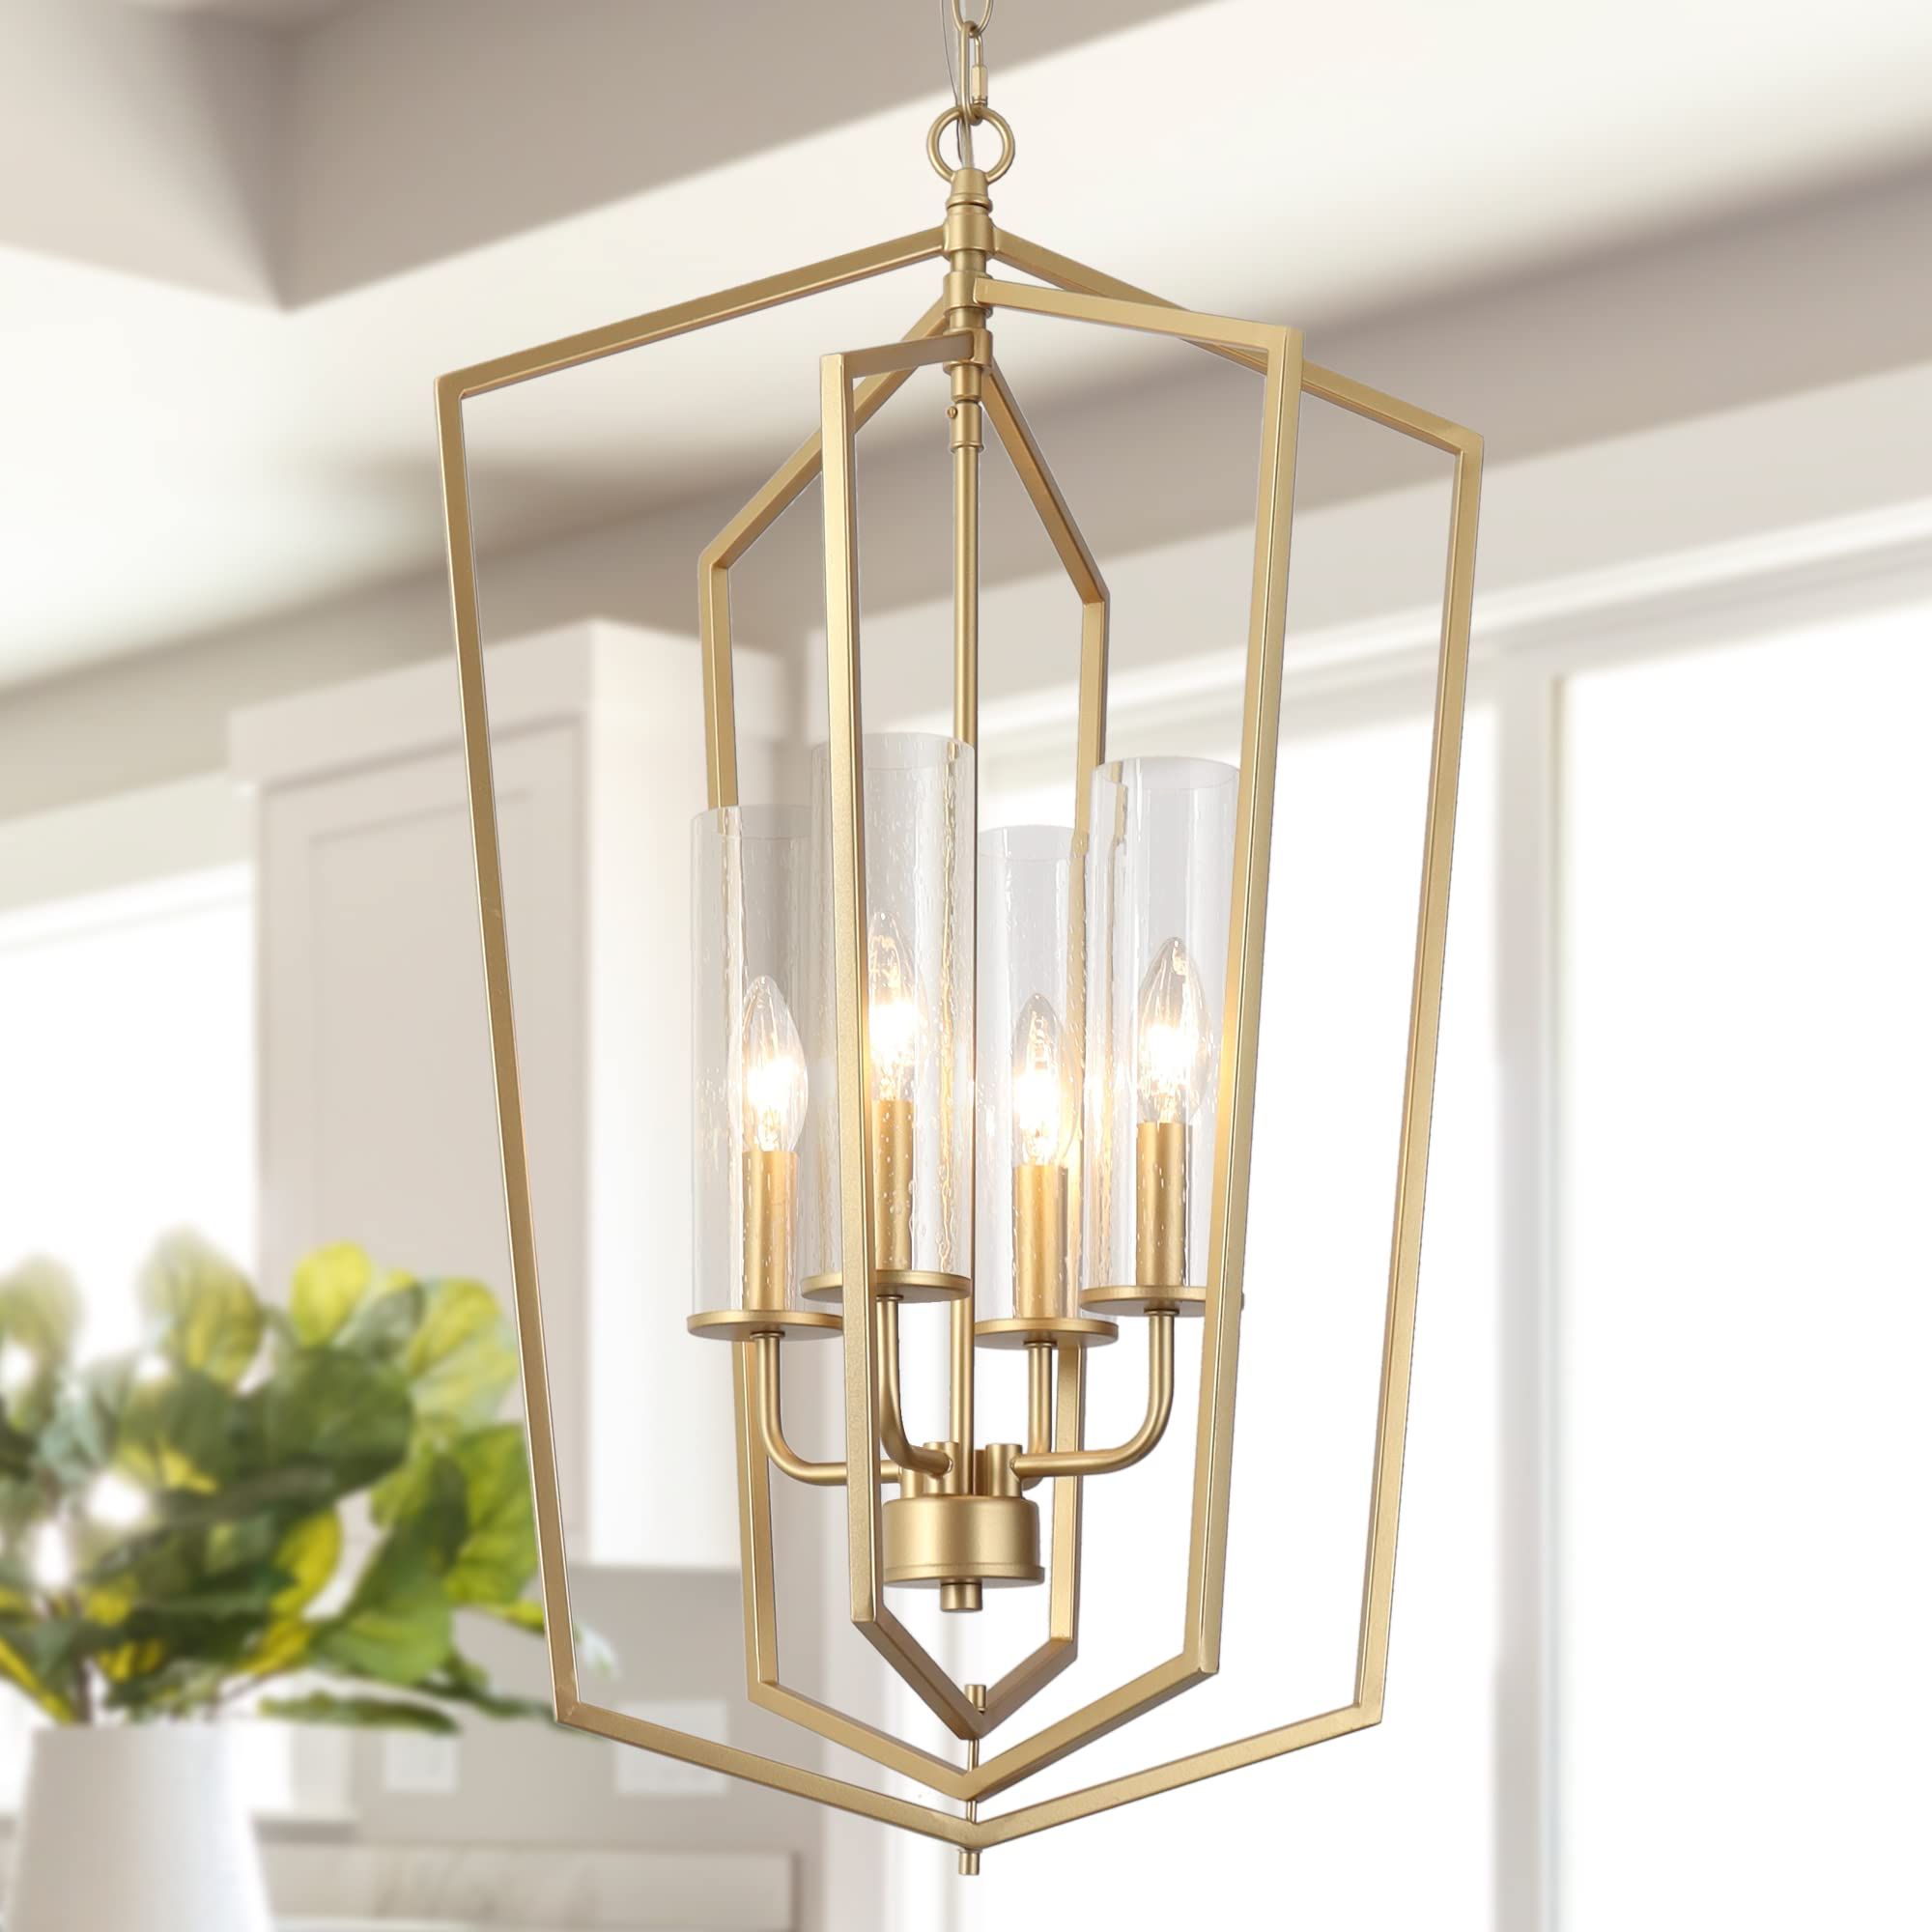 Durent Lighting Modern Gold Chandelier, 4 Light Rotatable Geometric Lantern  Pendant Light Fixture With Seeded Glass Shade For Kitchen Island, Foyer,  Dining Room, Bedroom – – Amazon With Regard To Popular Gild One Light Lantern Chandeliers (View 10 of 15)